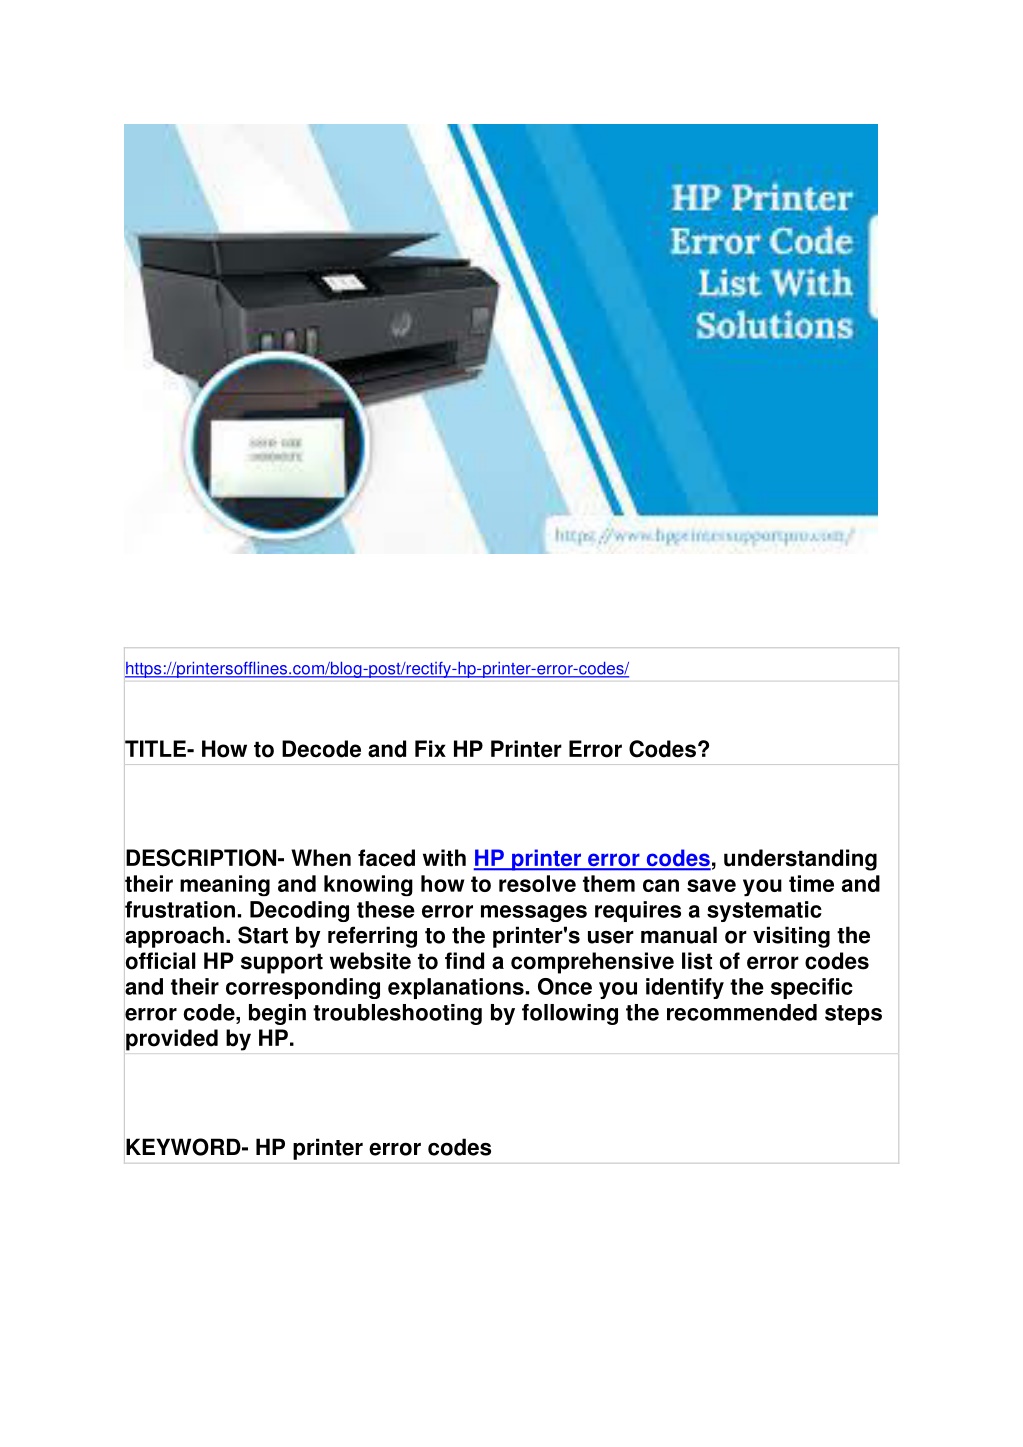 PPT How To Decode And Fix HP Printer Error Codes PowerPoint